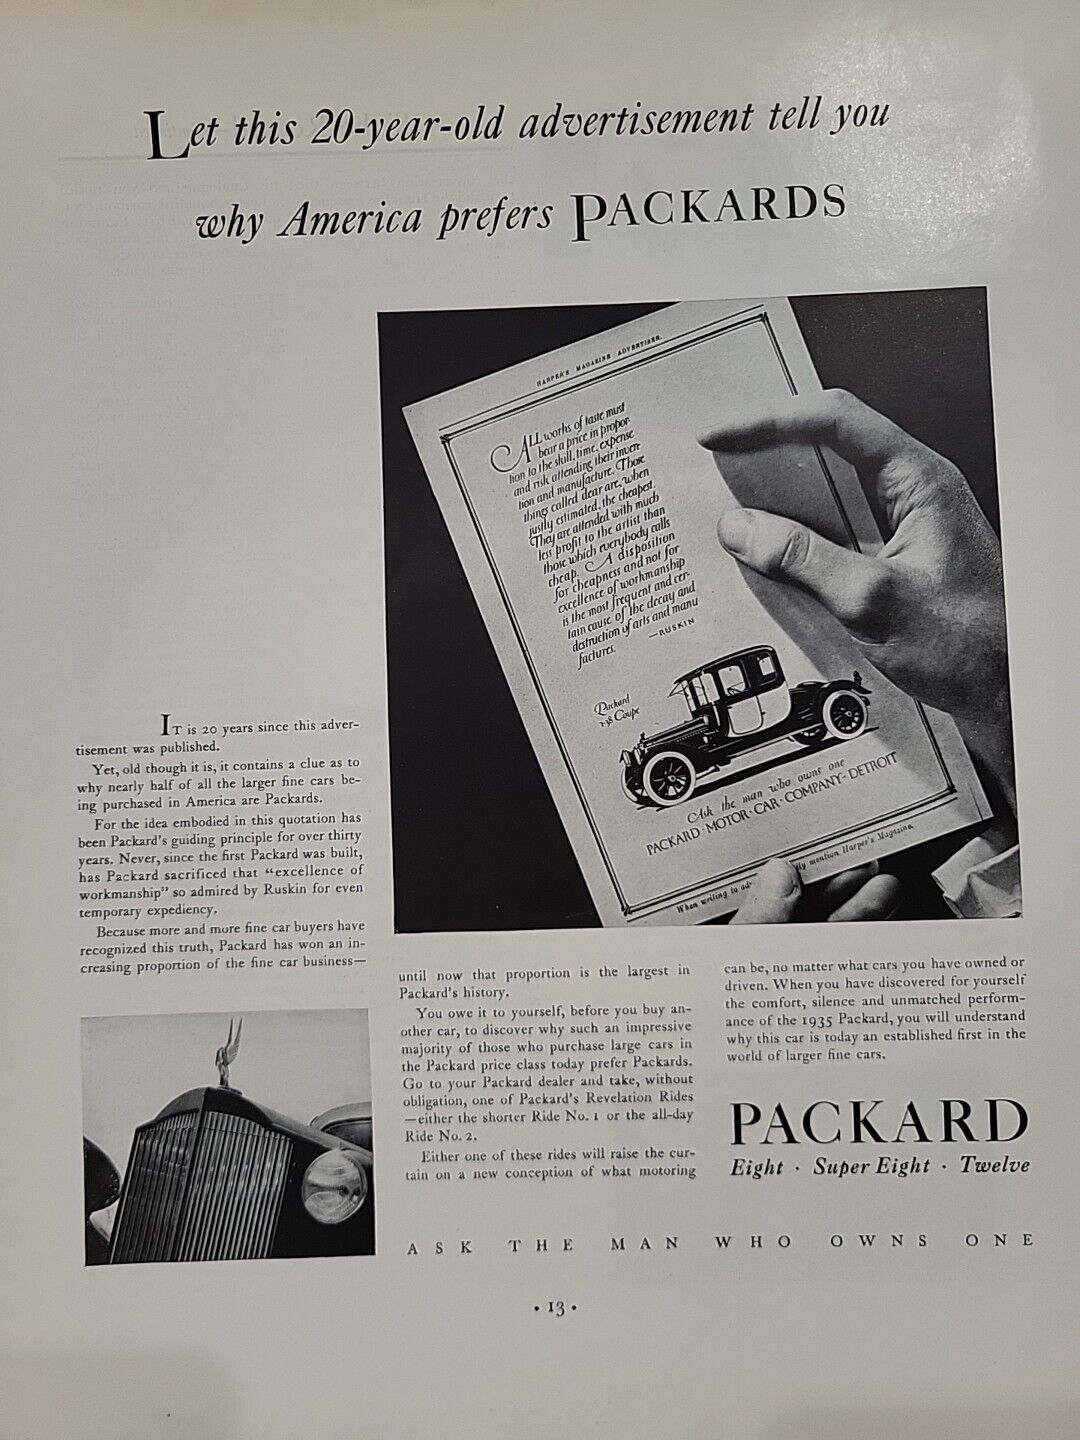 1935 Packard Motor Car Coupe Fortune Magazine Print Advertising Automobile